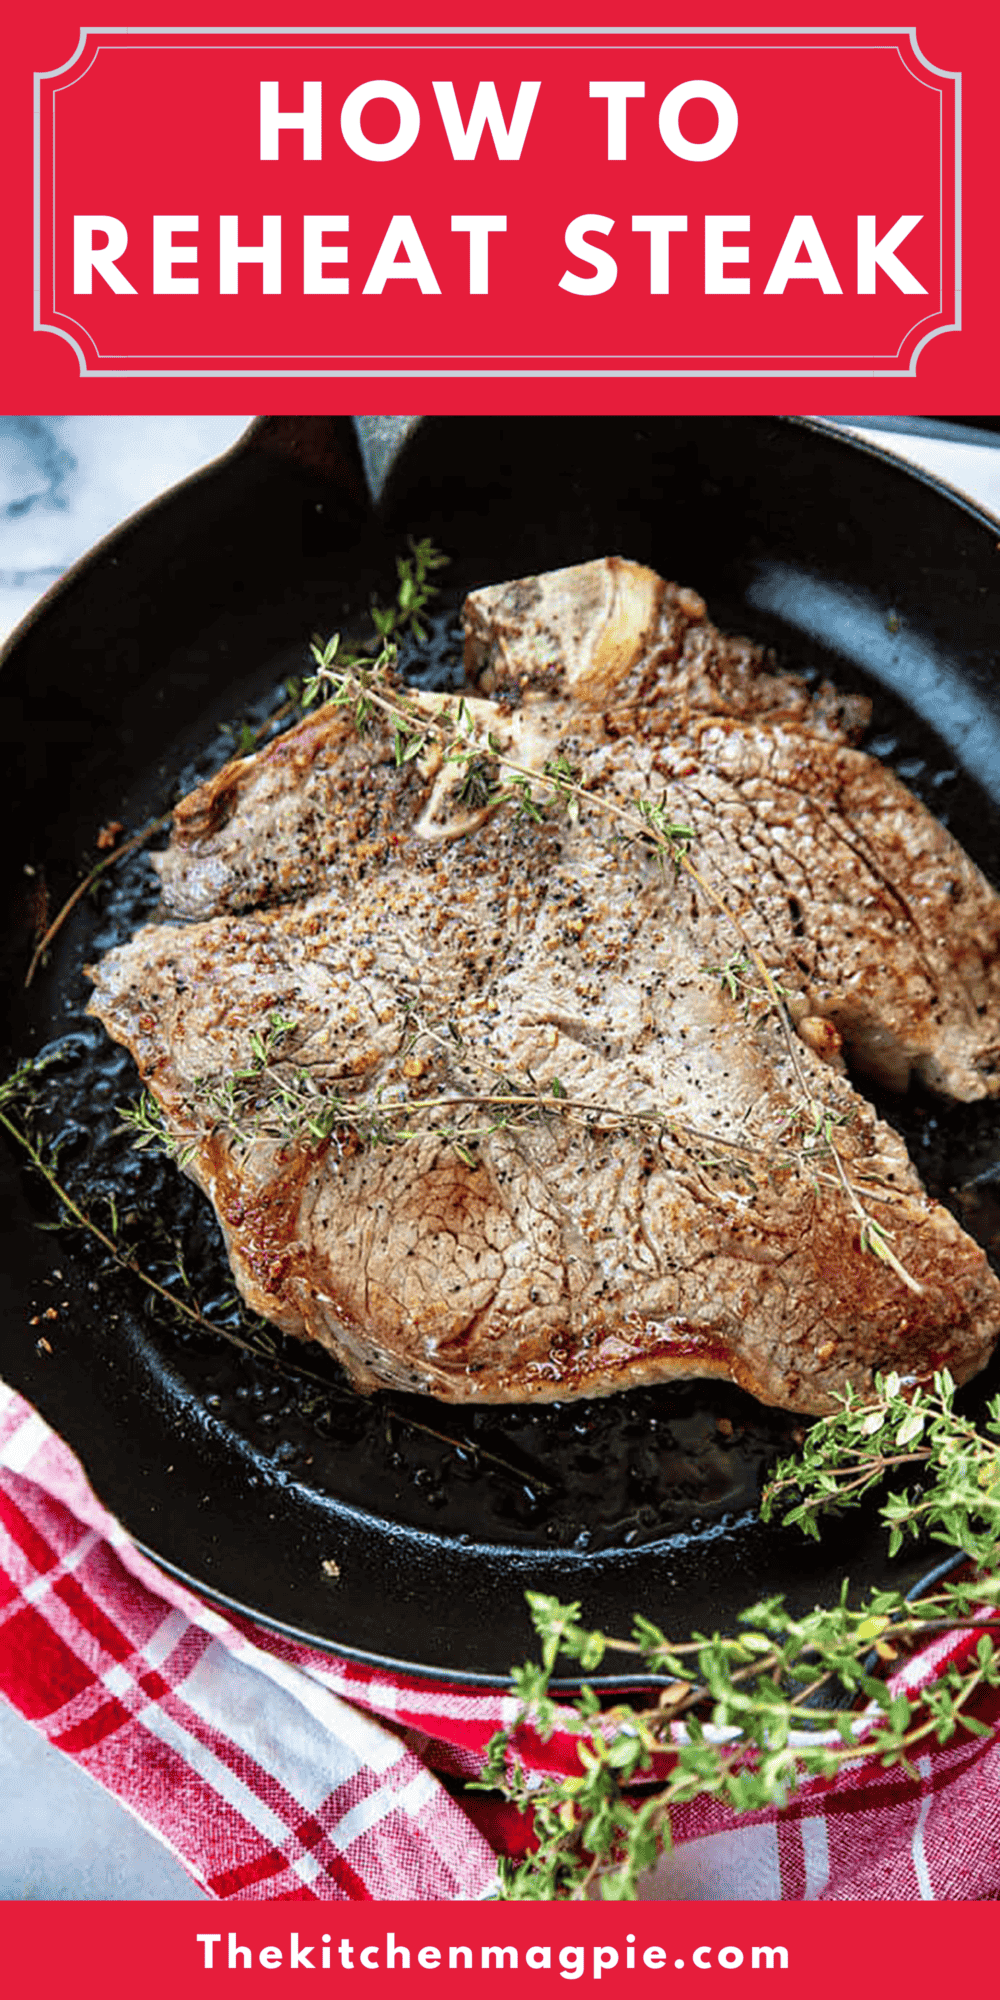 A few easy ways to help reheat your favorite steak so you can have delicious leftovers later!